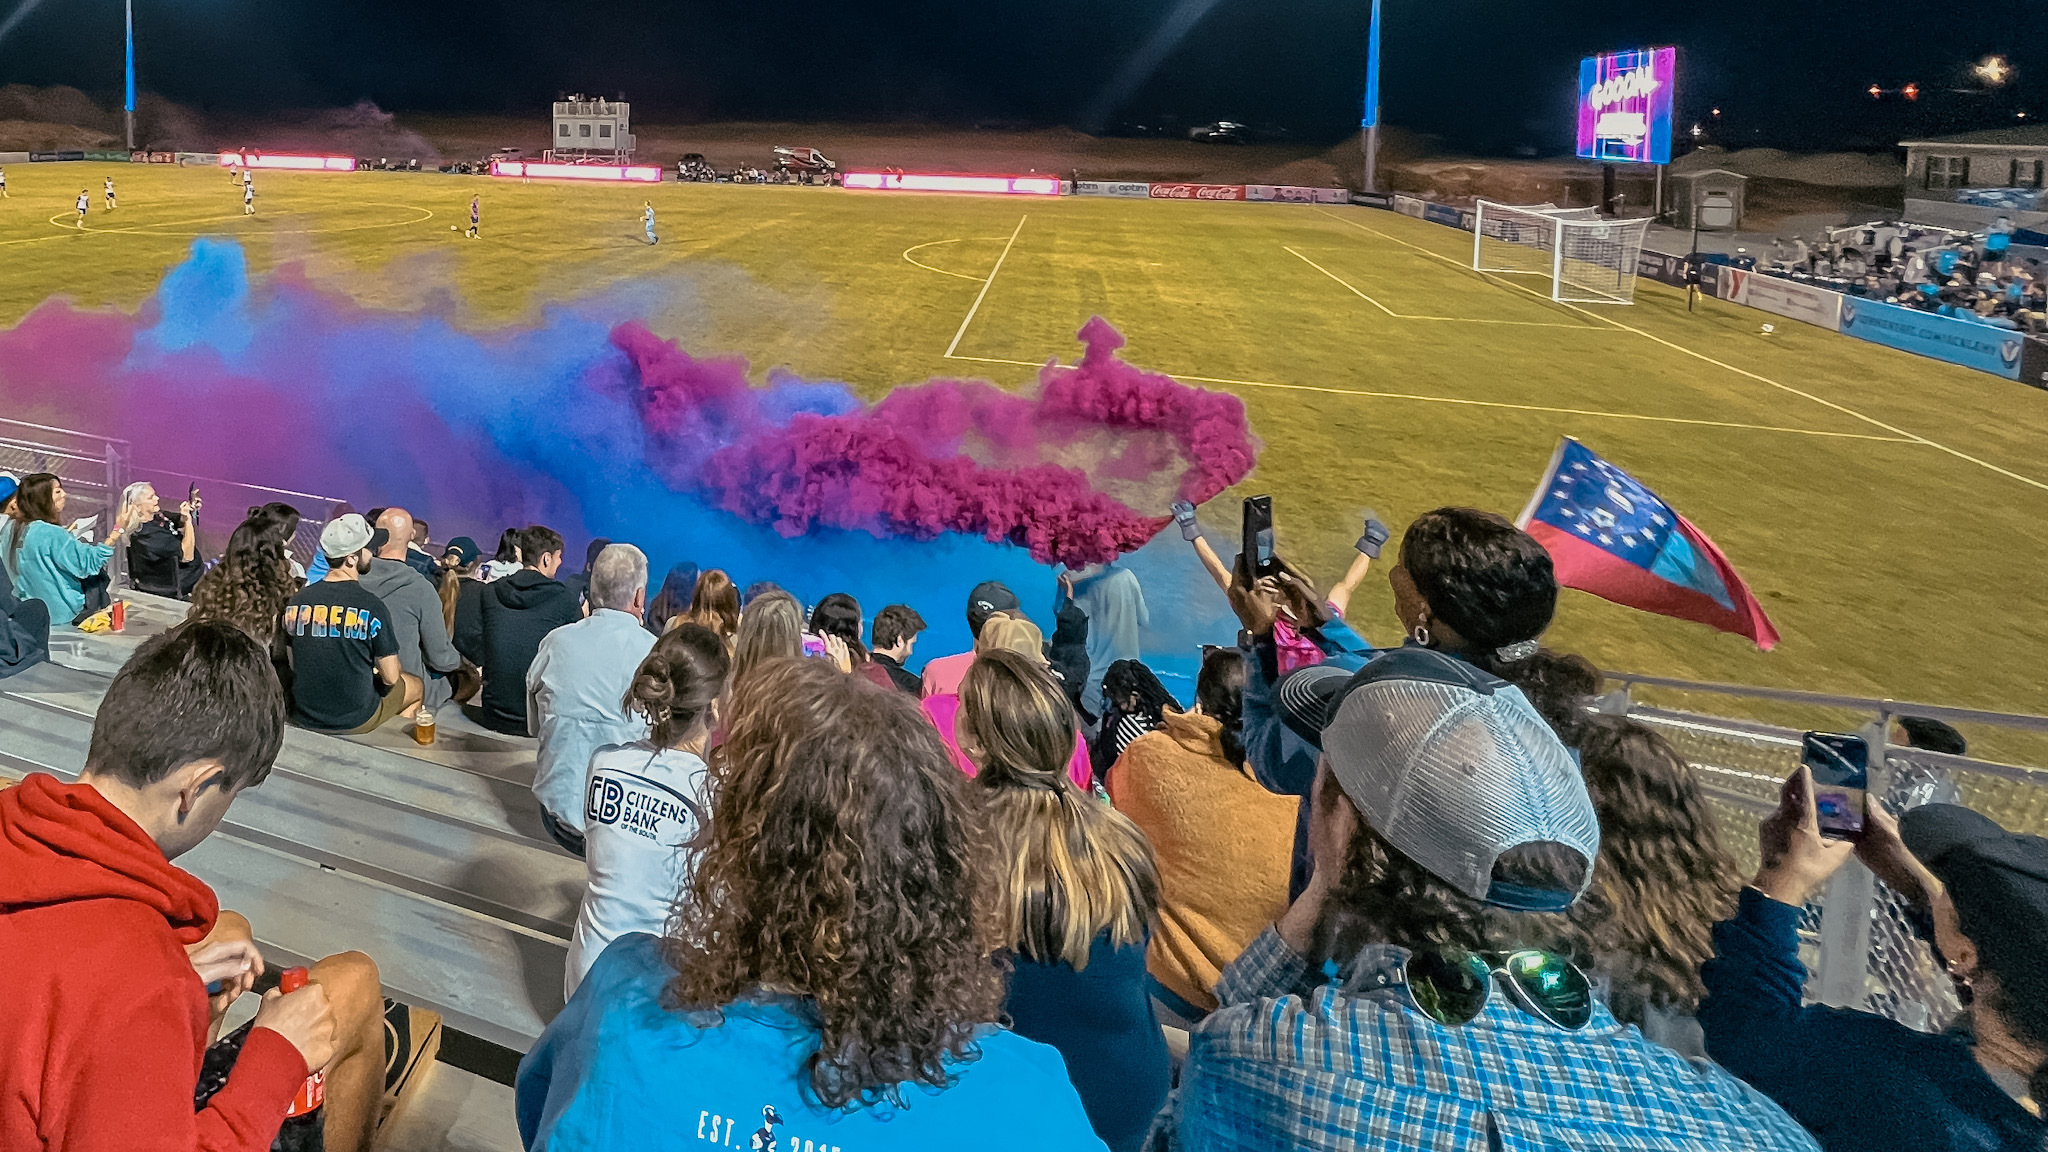 Scoring Goals for a Good Cause: Tormenta FC to Donate to Local Statesboro Food Bank featured image